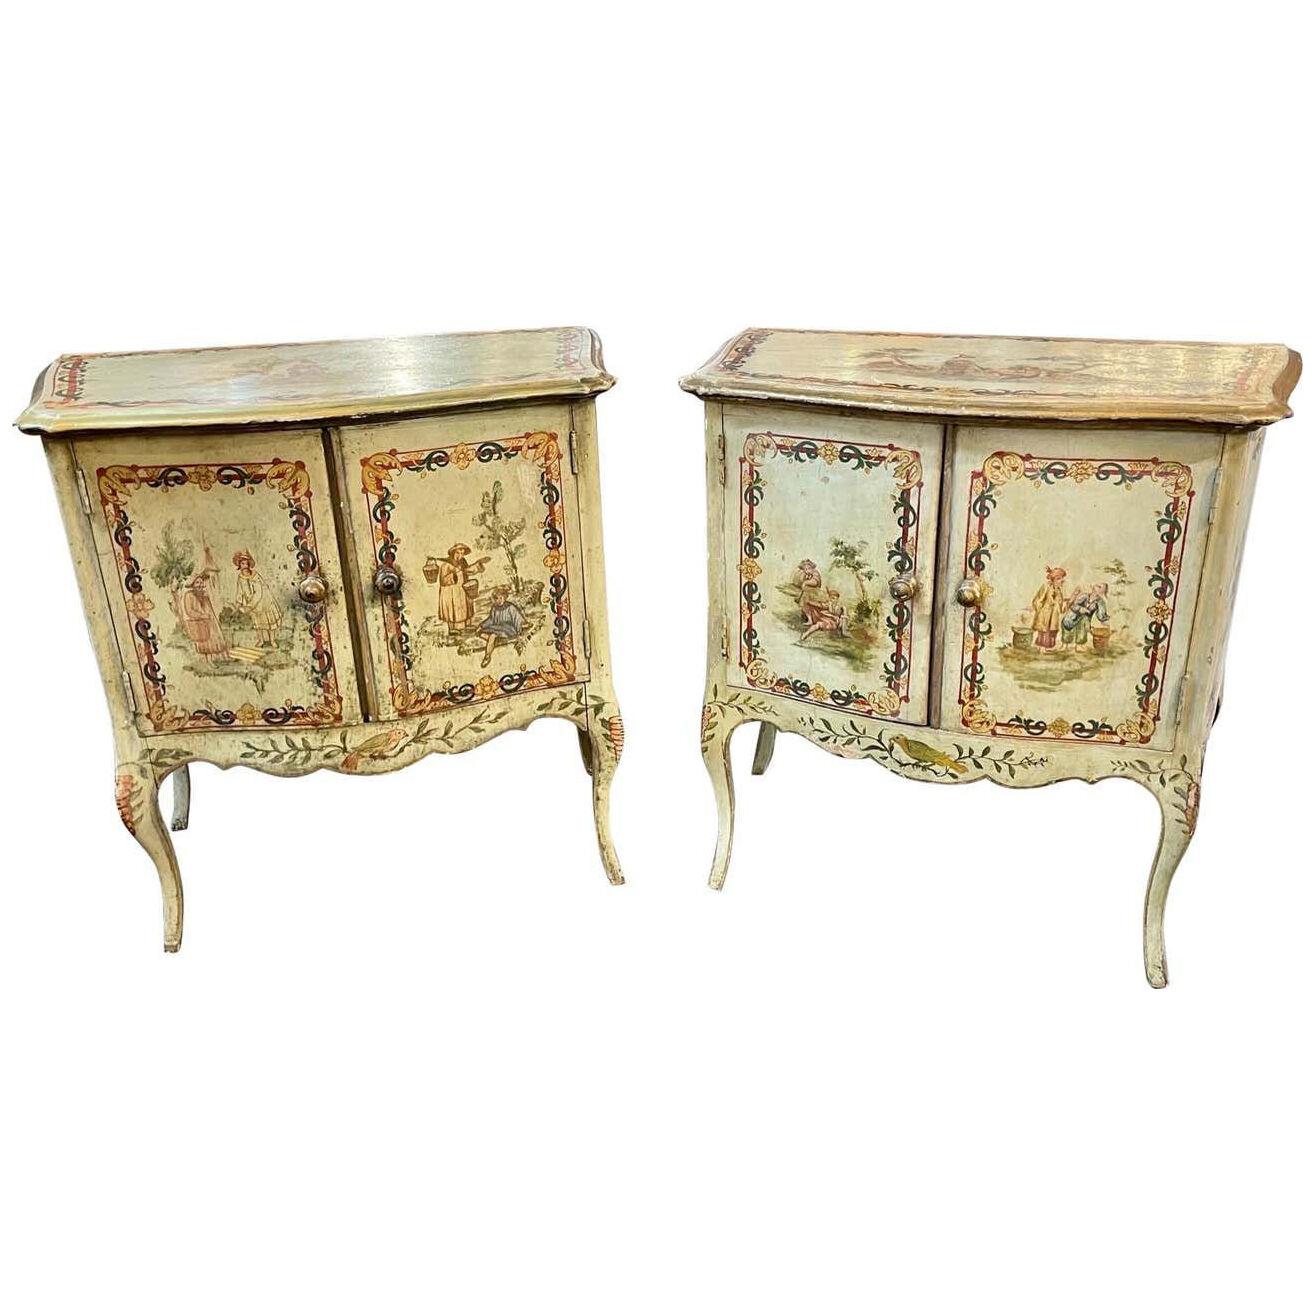 Antique pair of Italian Chinoiserie Decorated Bedside Tables